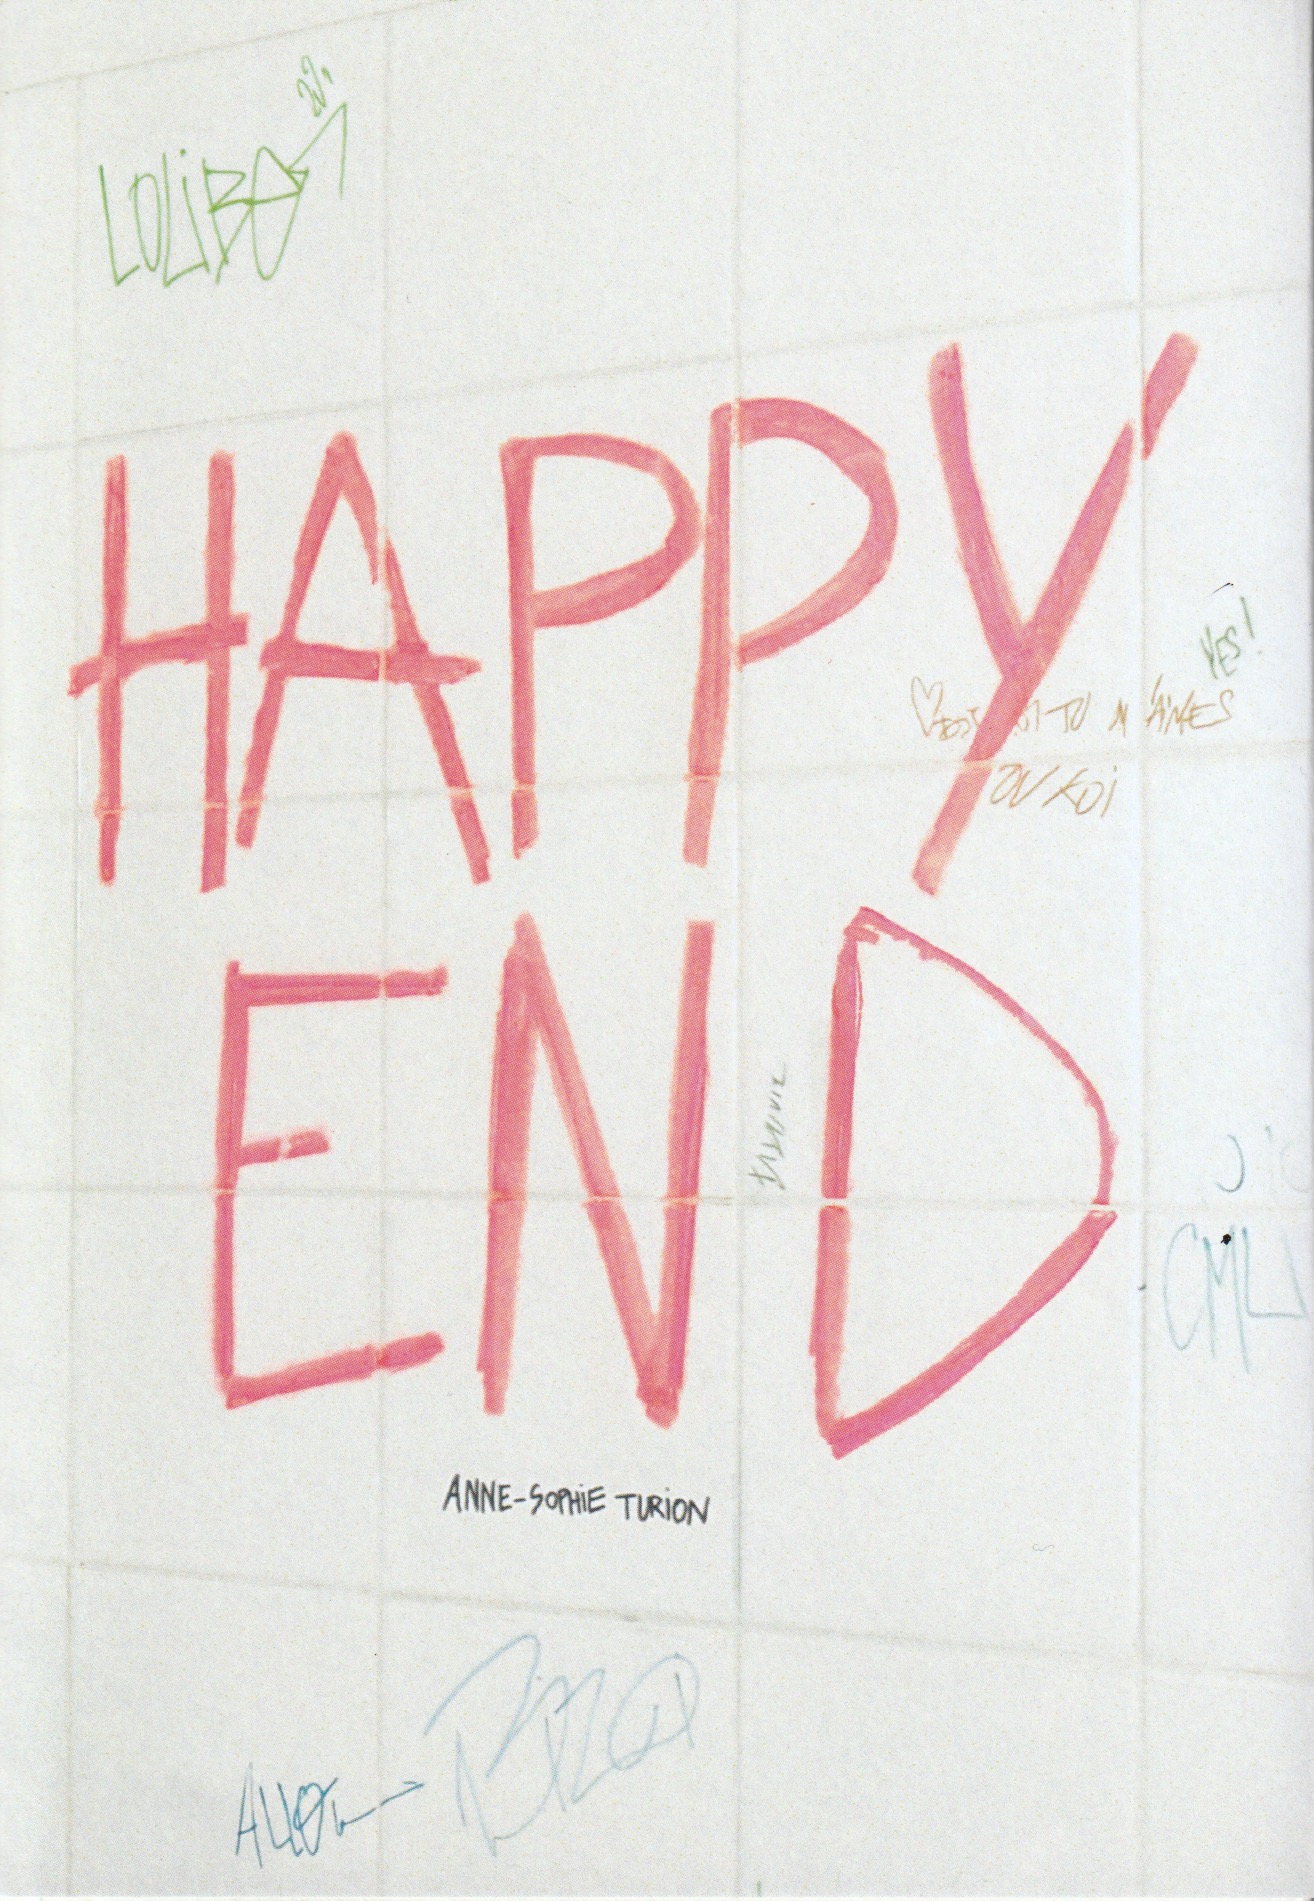 Happy End, Anne-Sophie Turion